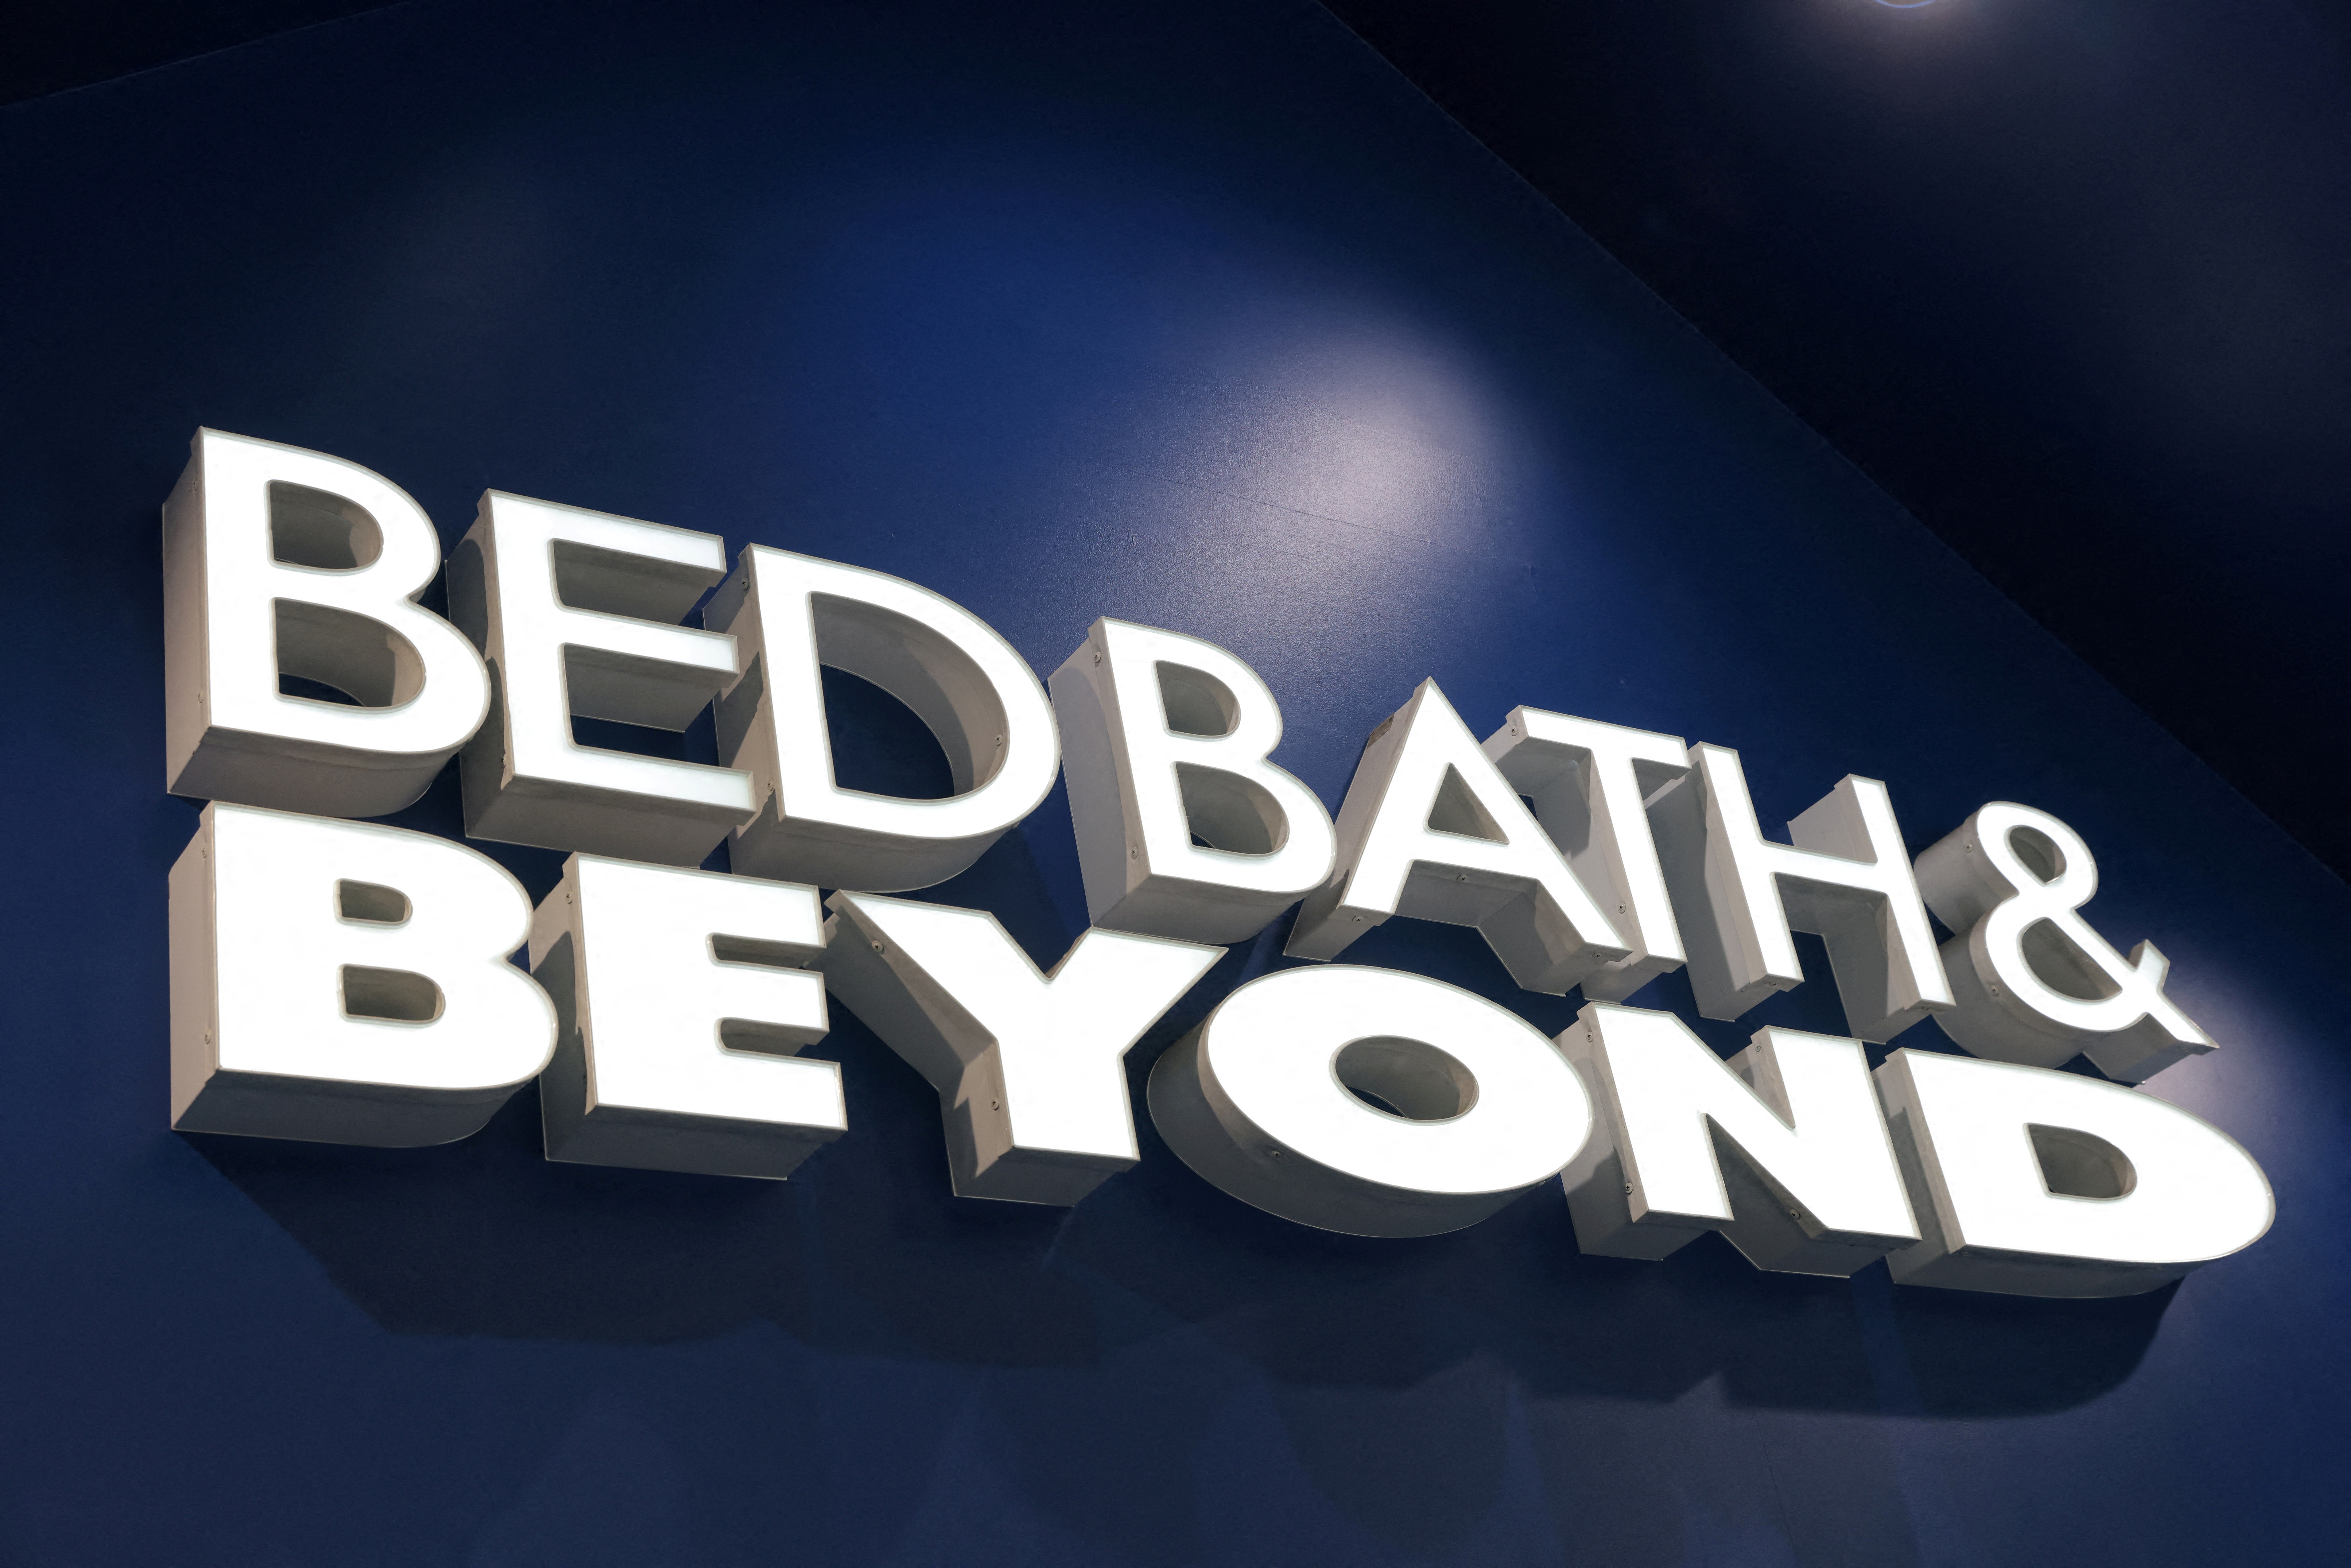 Bed Bath & Beyond to cut jobs, close stores in effort to reverse losses